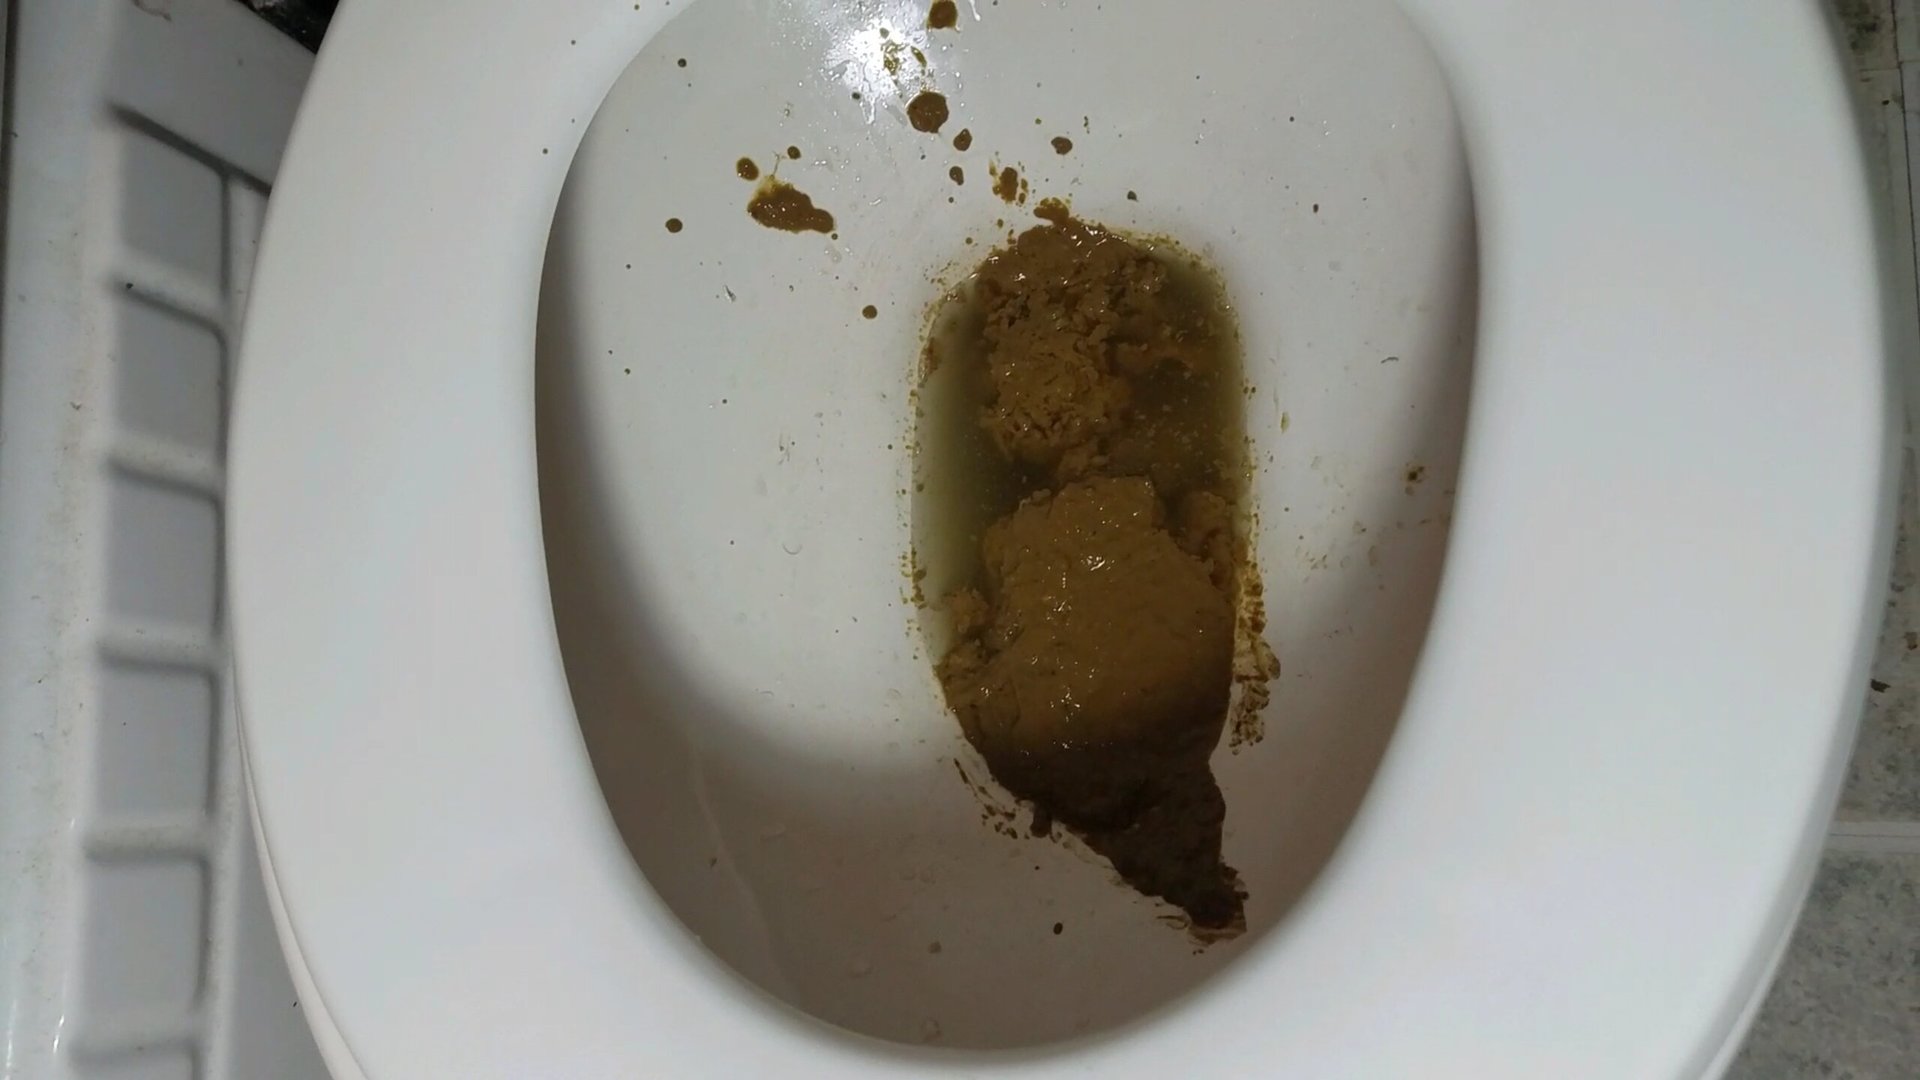 Sloppy Bbw Porn - Bbw sloppy shit in toilet. - ScatFap.com - scat porn search - FREE videos  of extreme kaviar and copro sex, dirty shit eating and smearing